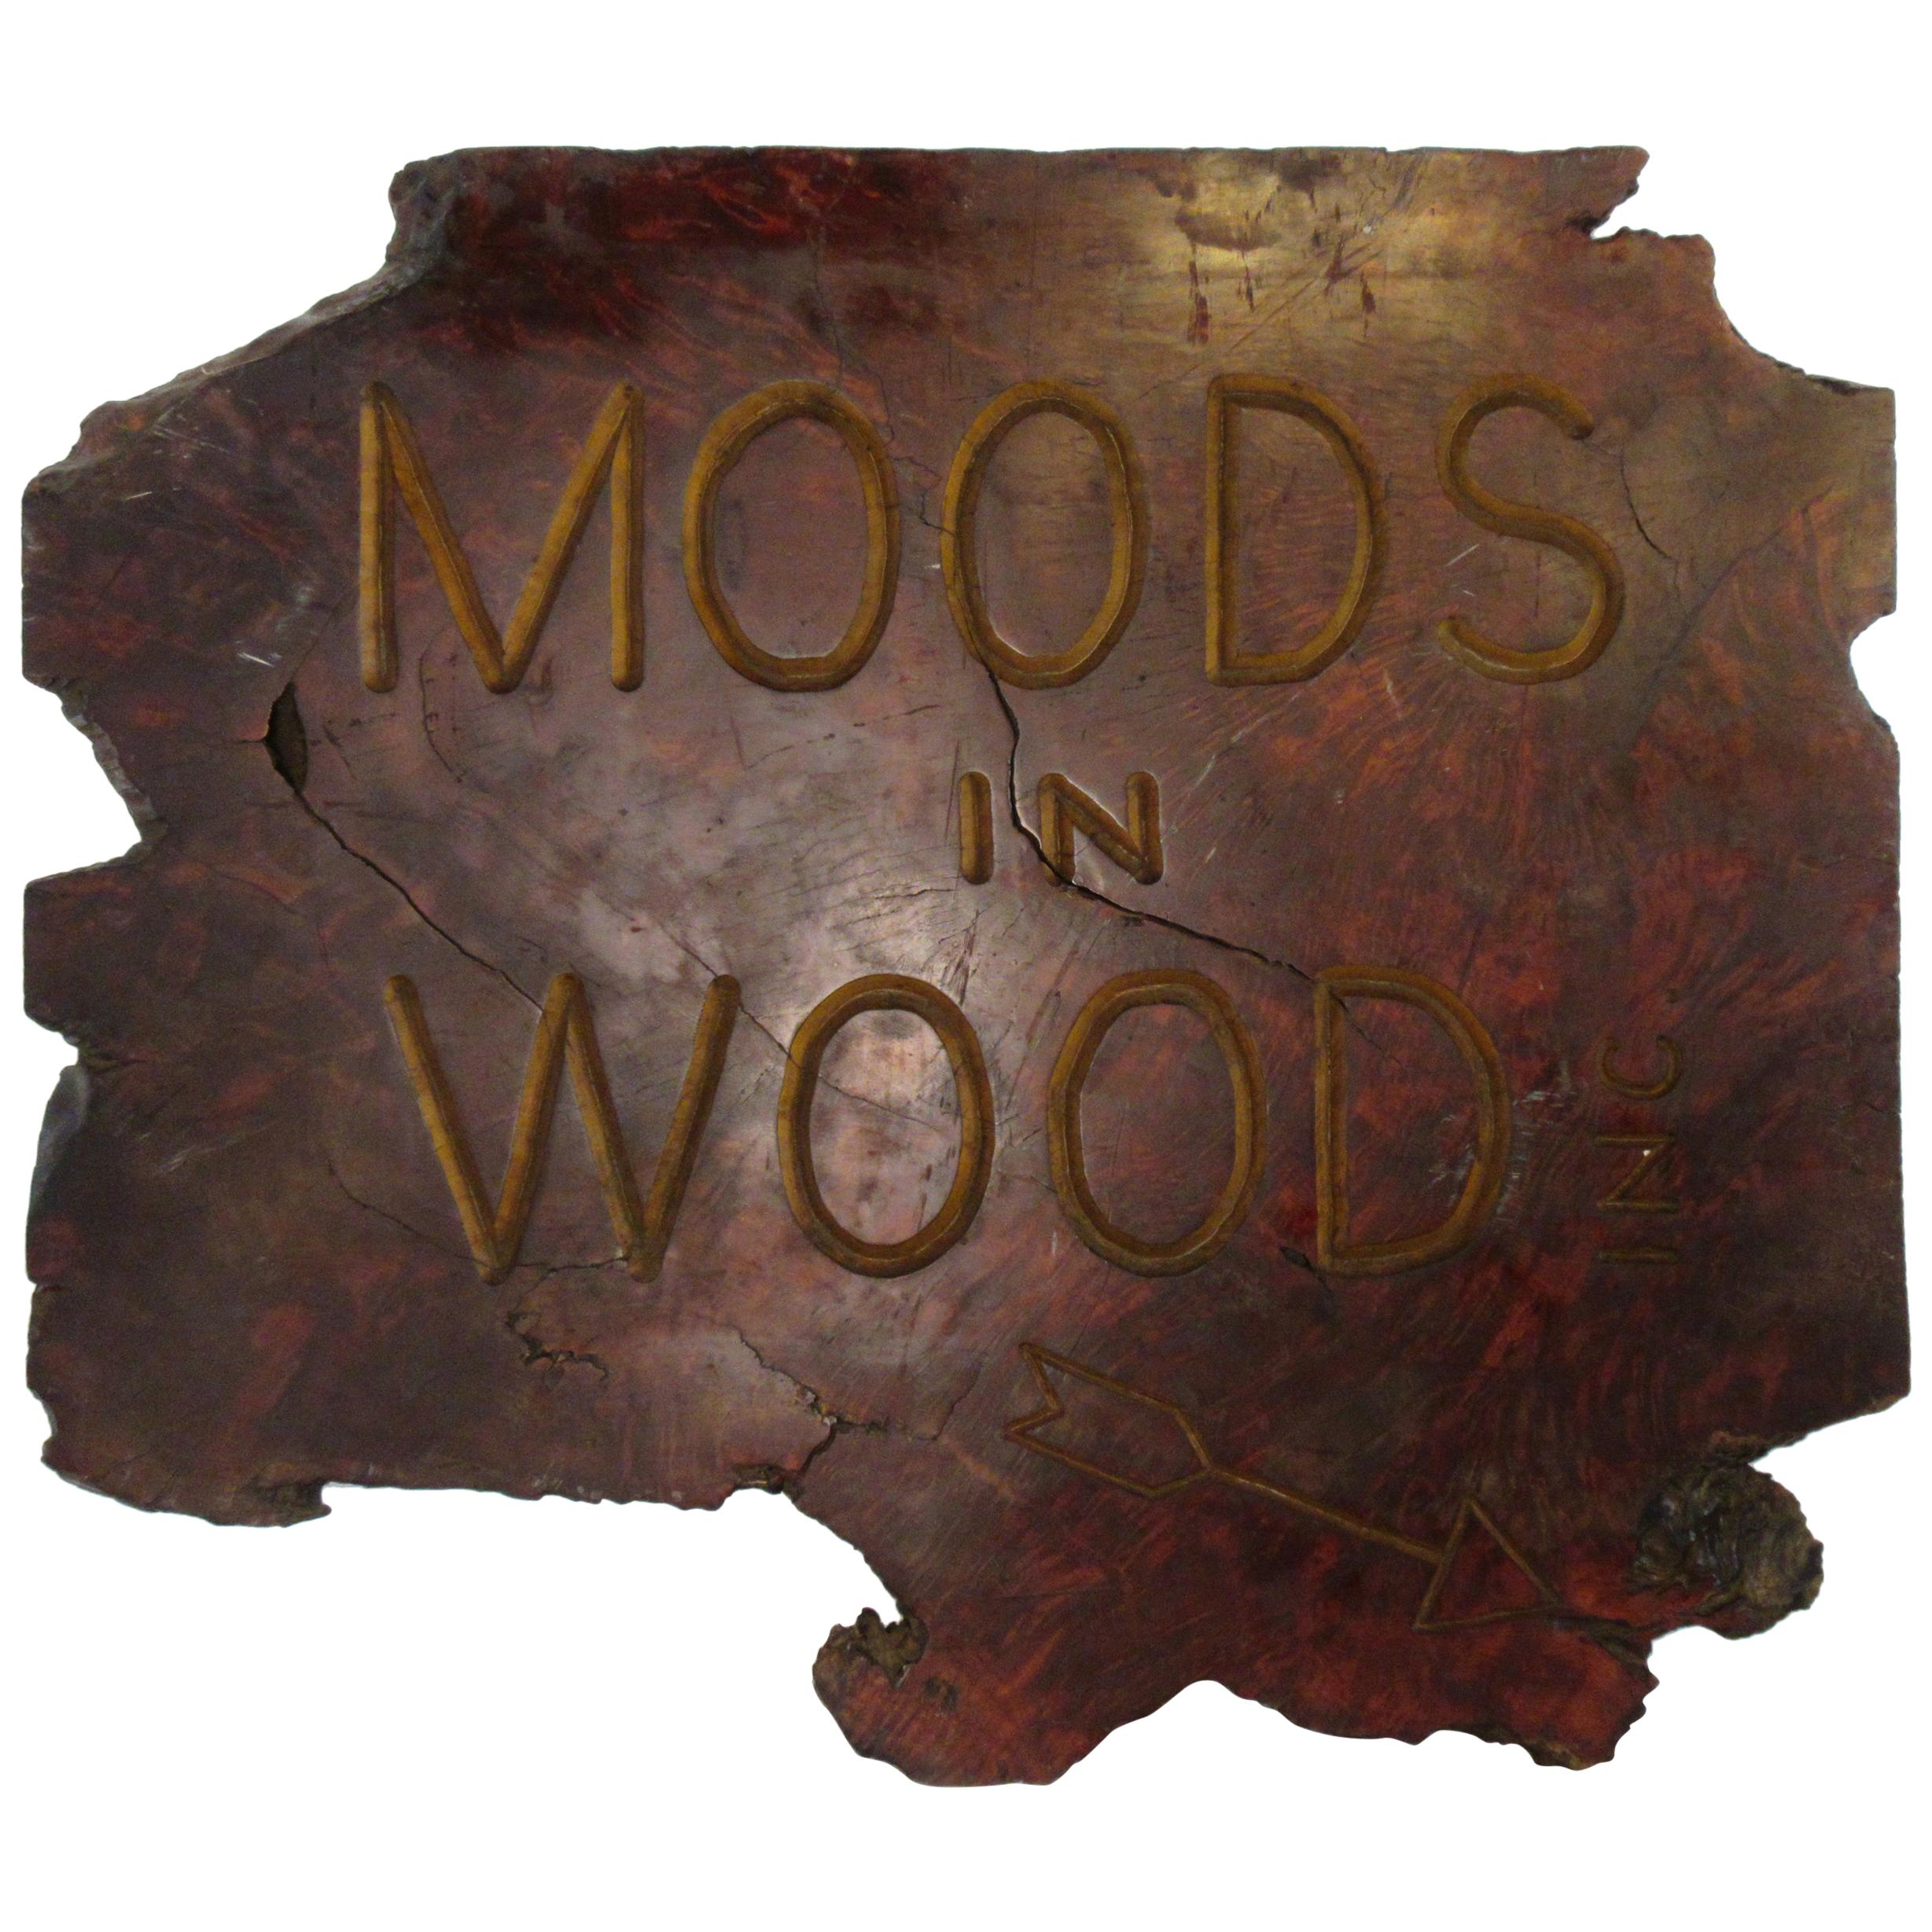 1970s Moods In Wood Sign For Sale